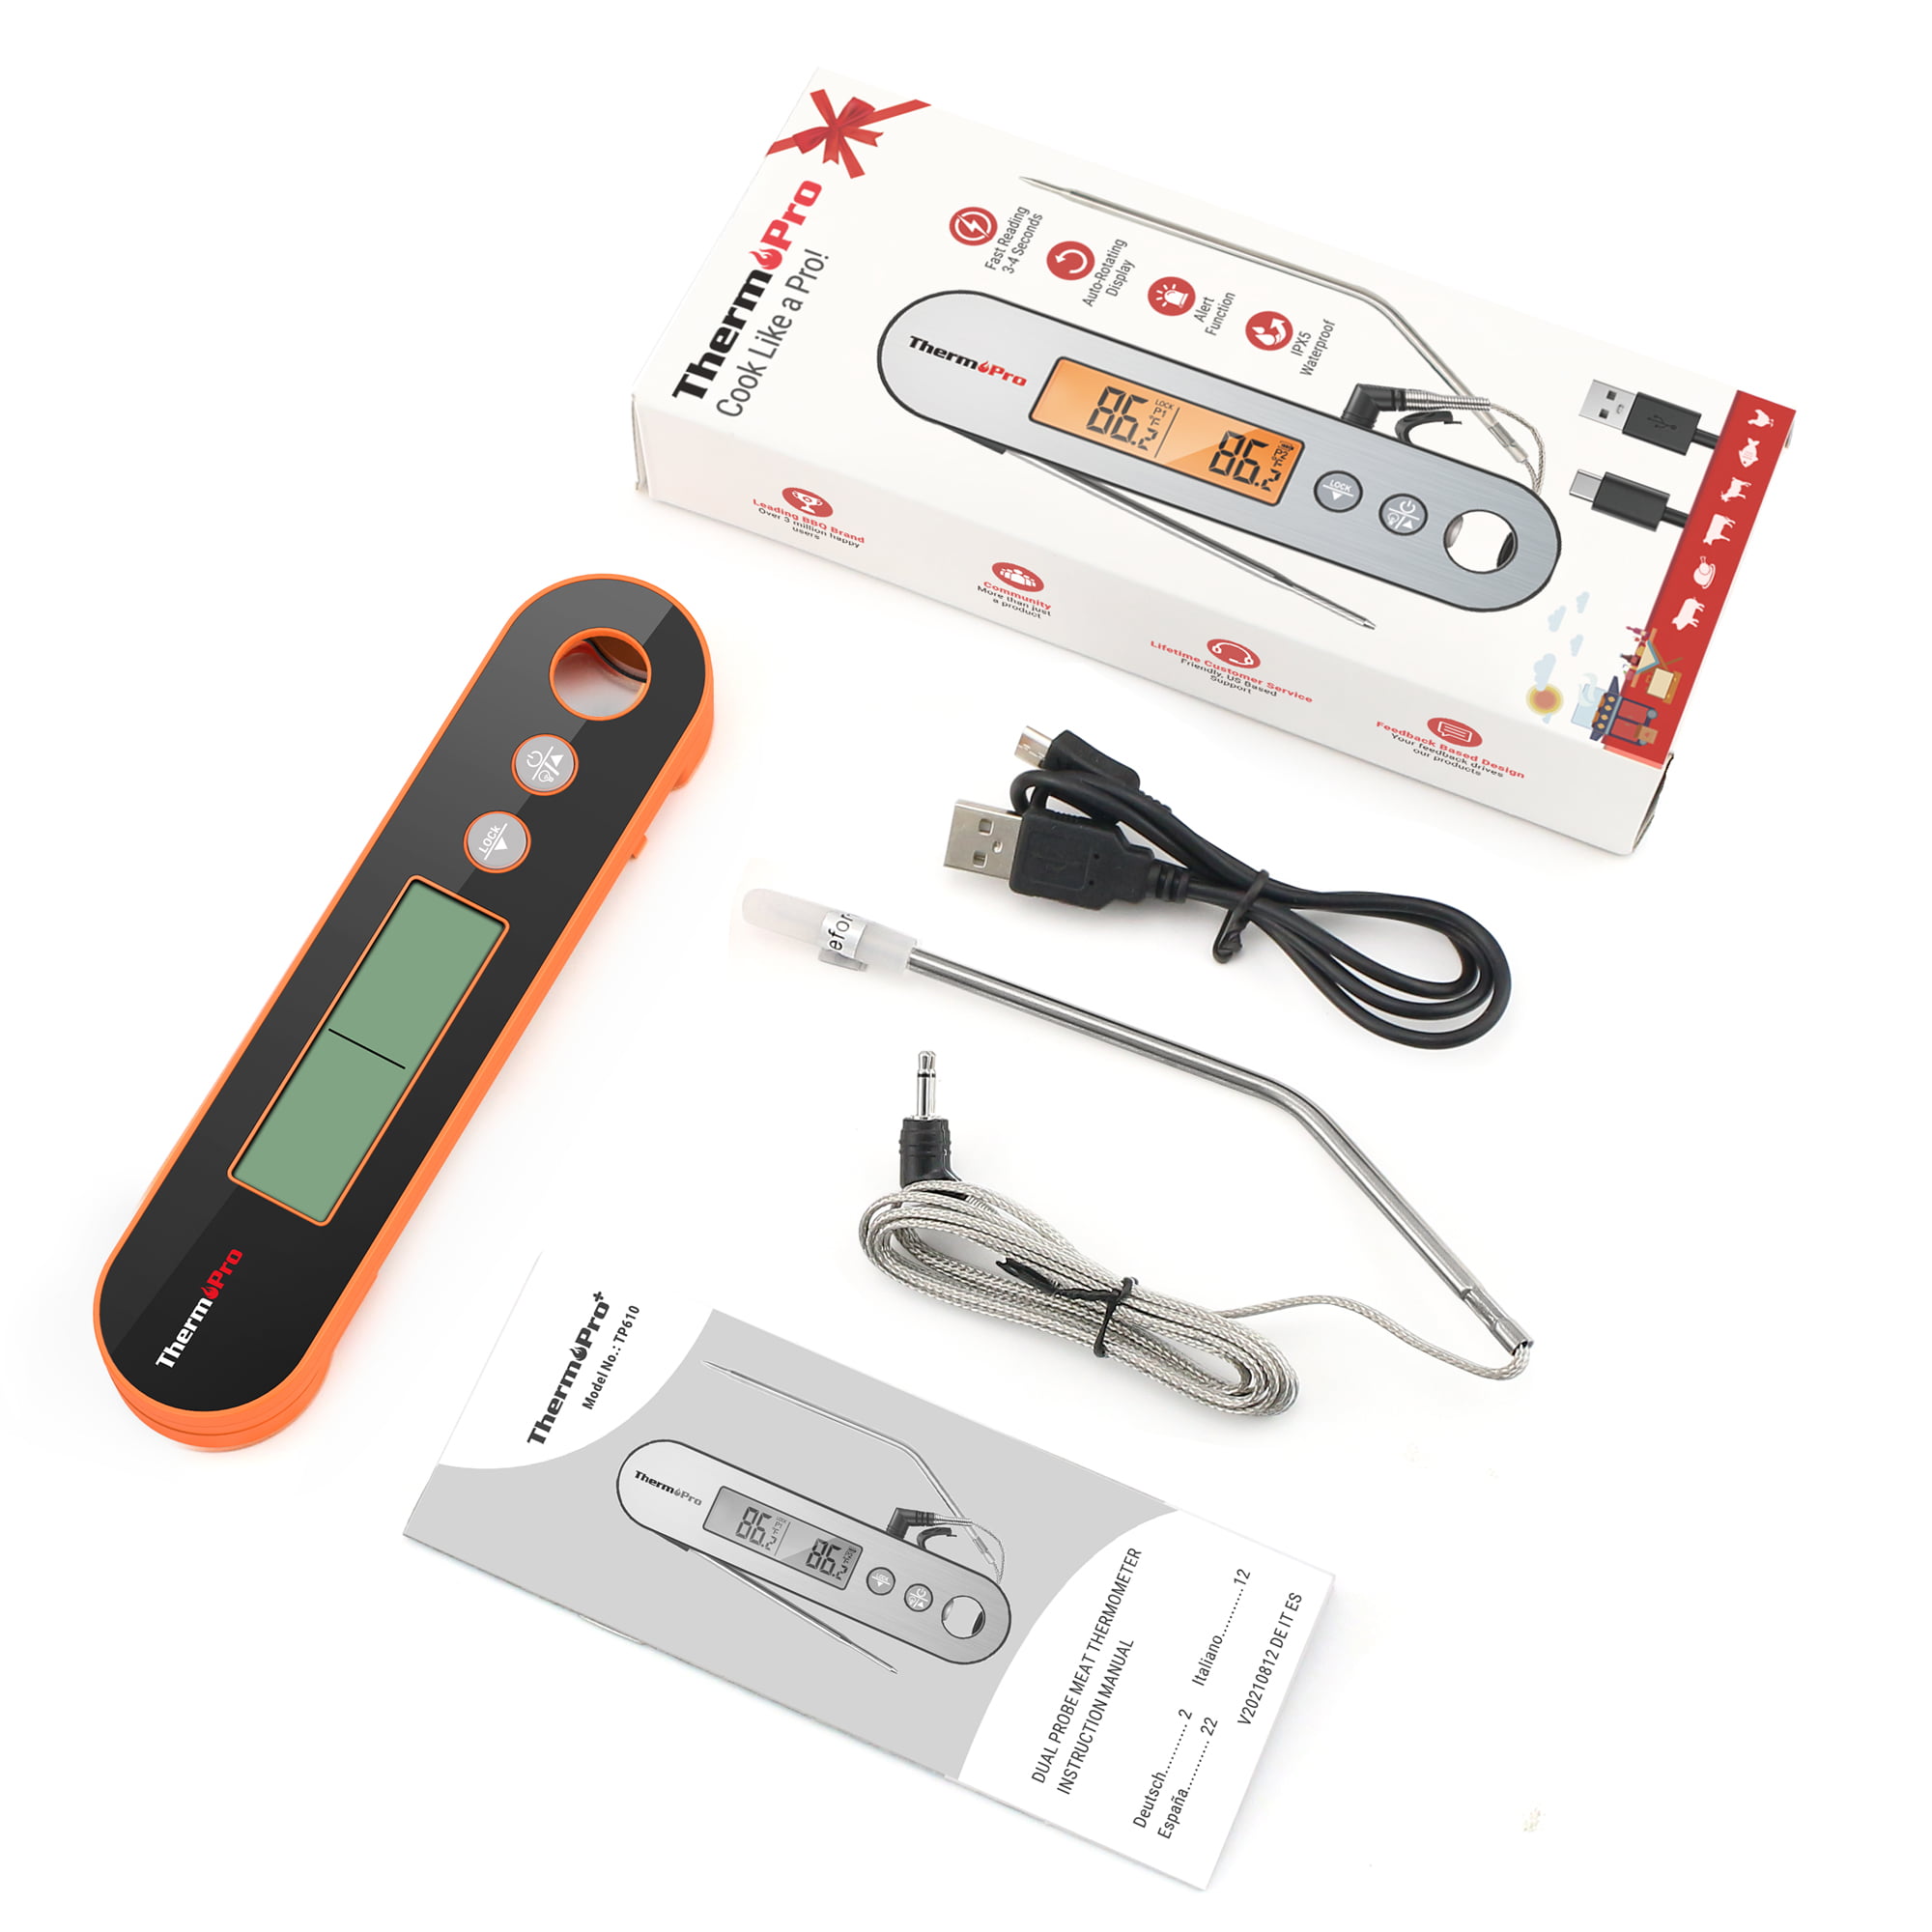 Cooking Thermometer Unboxing and Quick review Therm Pro Dual Probe